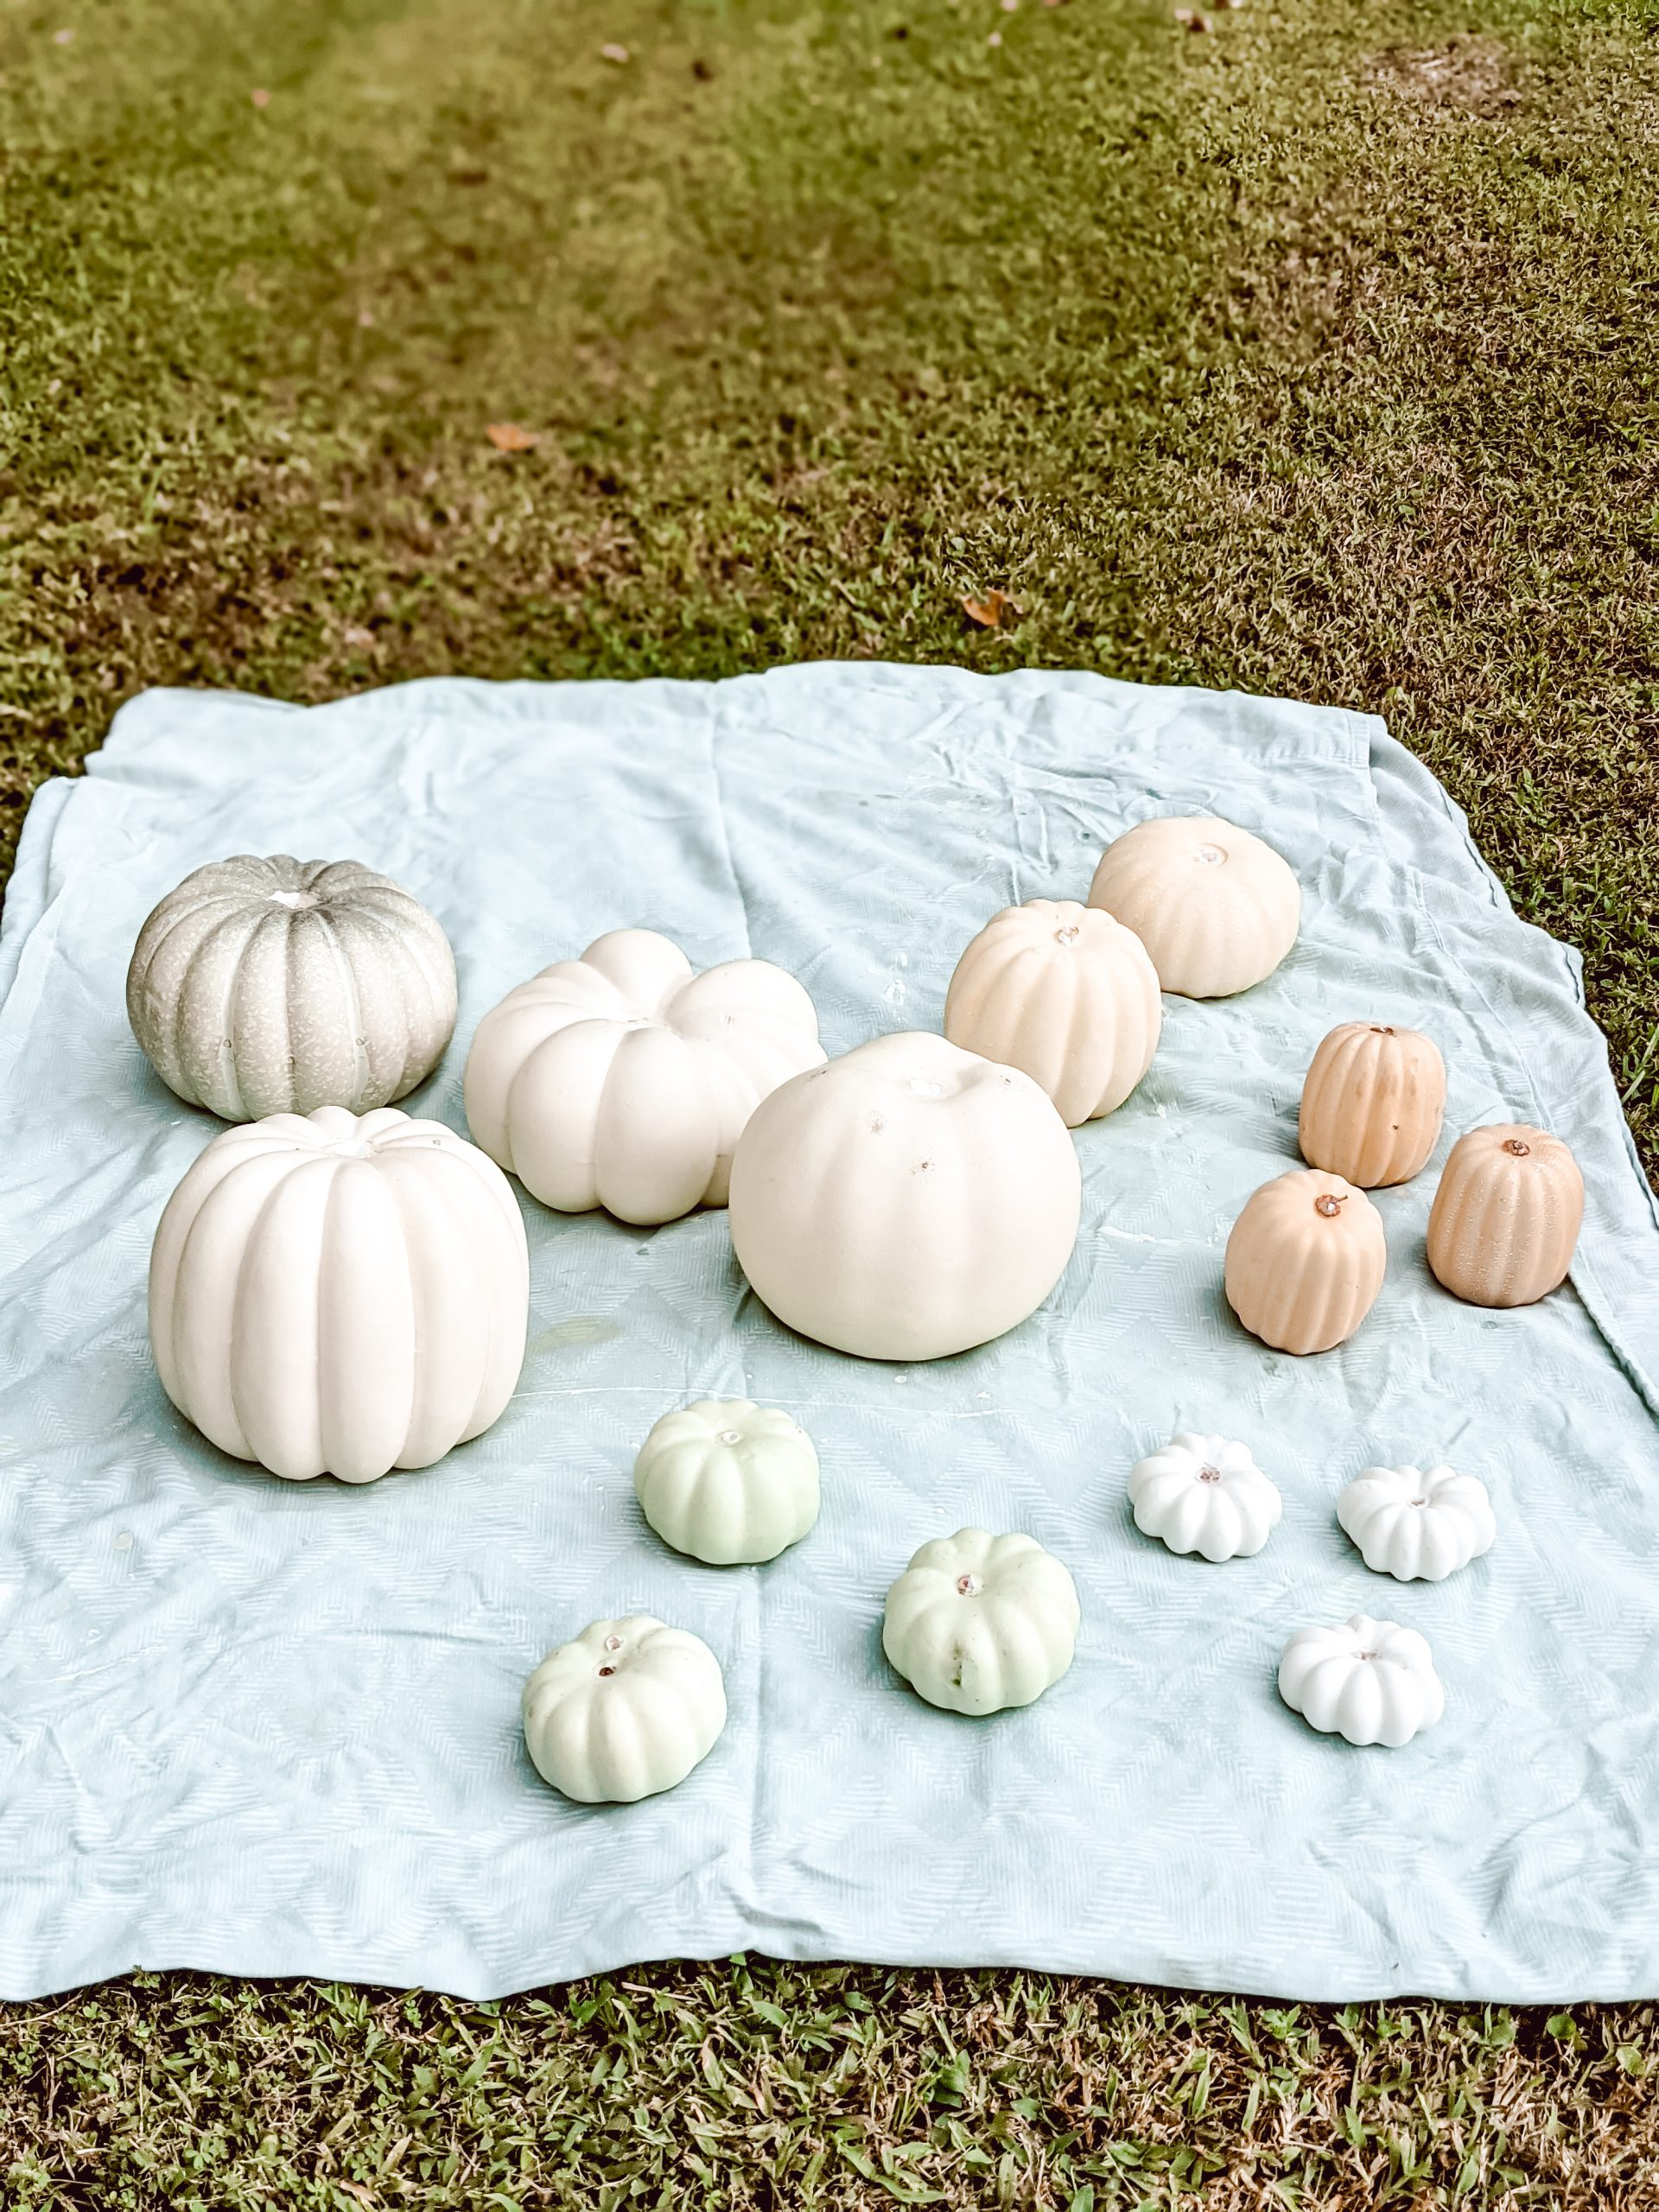 prepping to paint pumpkins